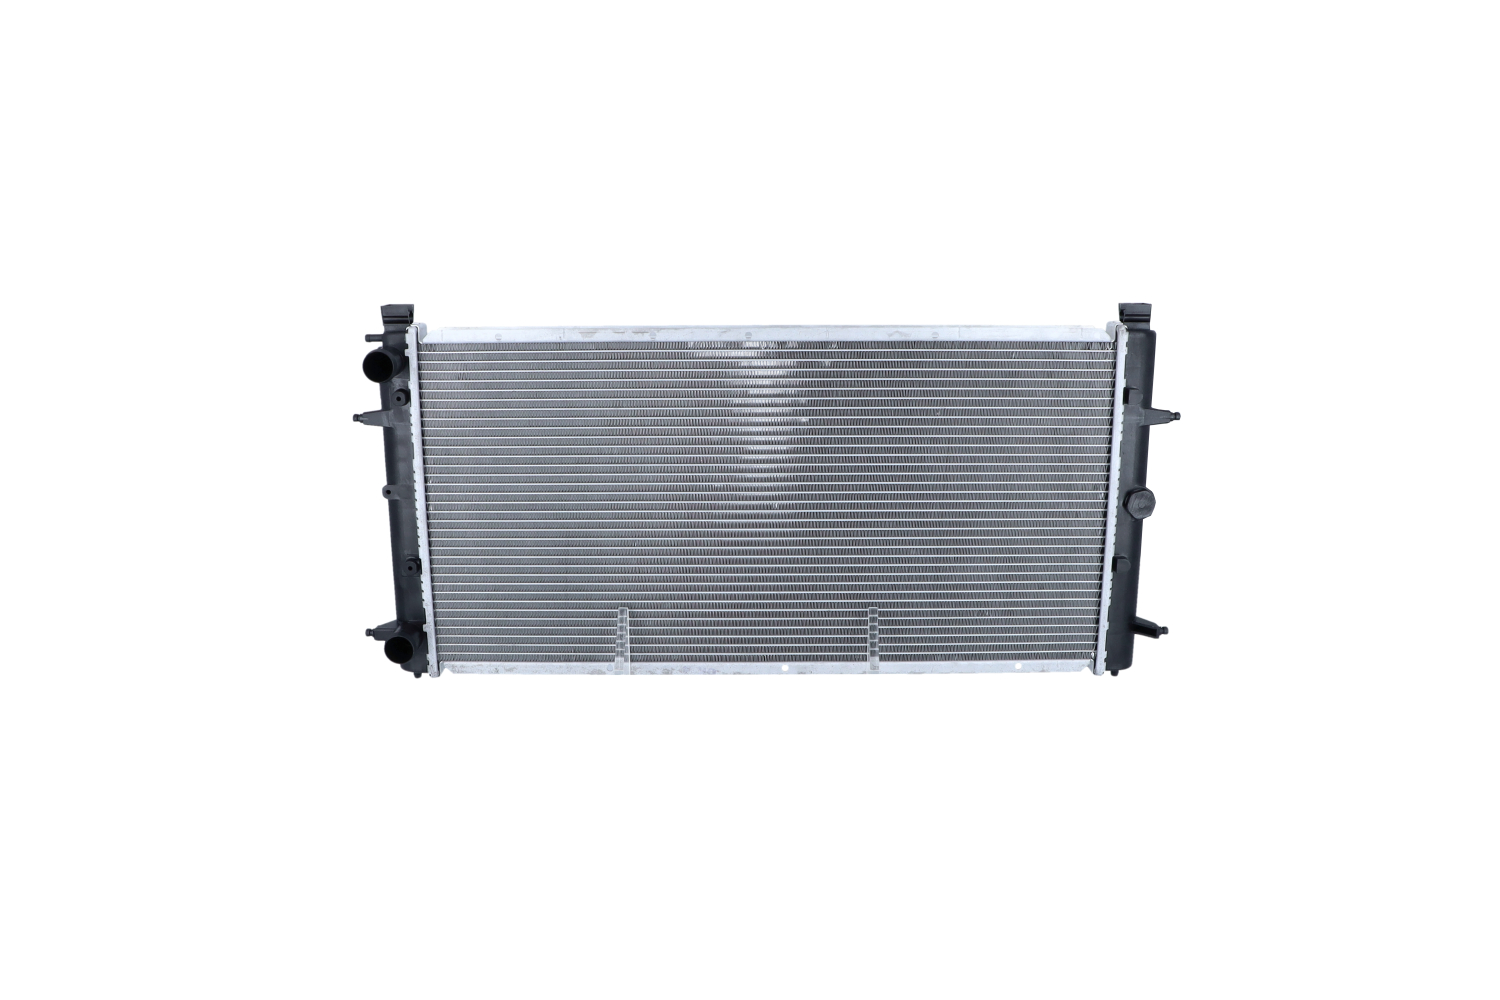 NRF 509514 Engine radiator Aluminium, 720 x 346 x 34 mm, with mounting parts, Brazed cooling fins